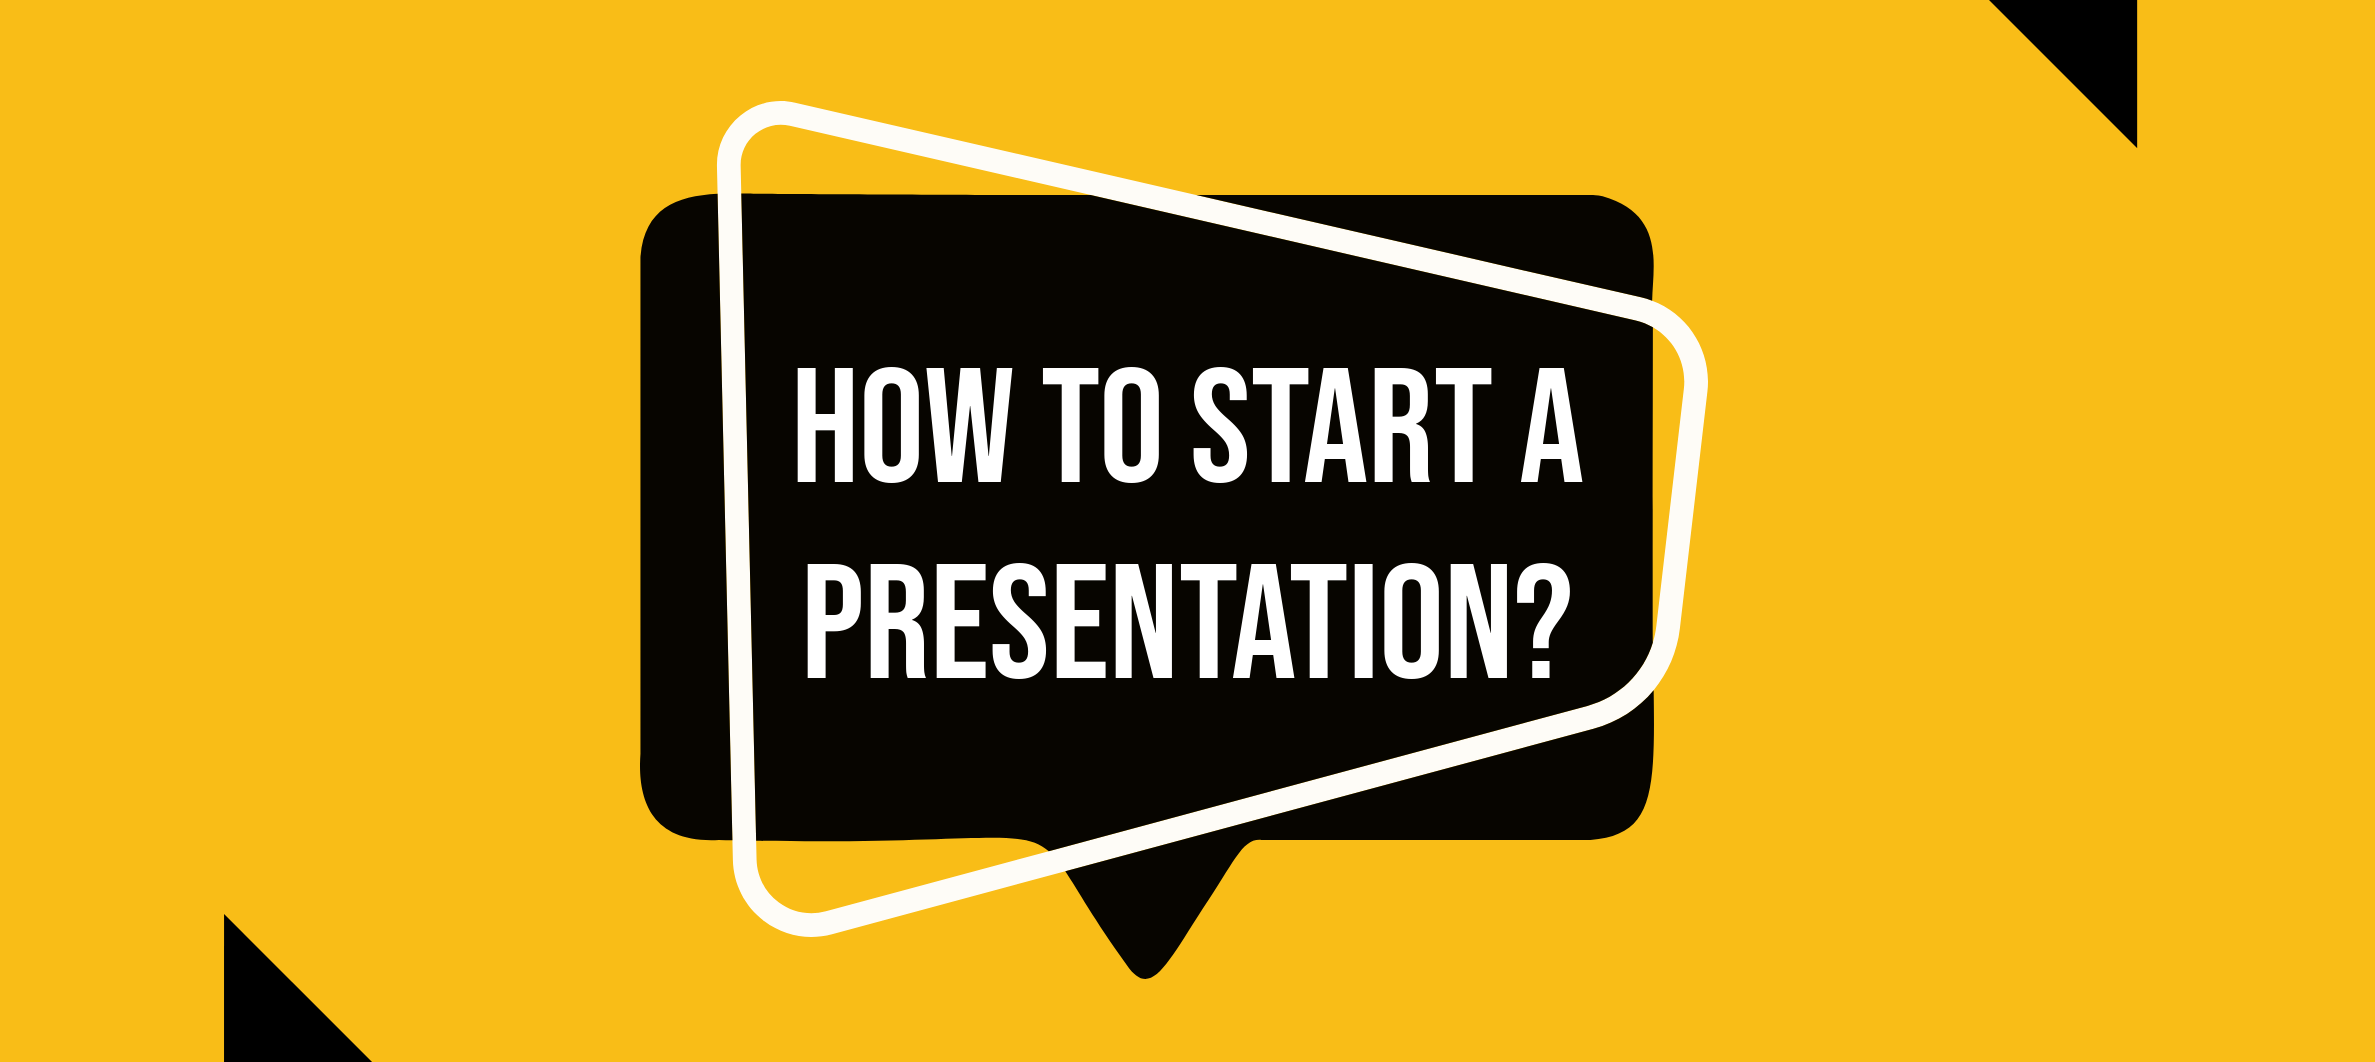 how to start a presentation on a topic